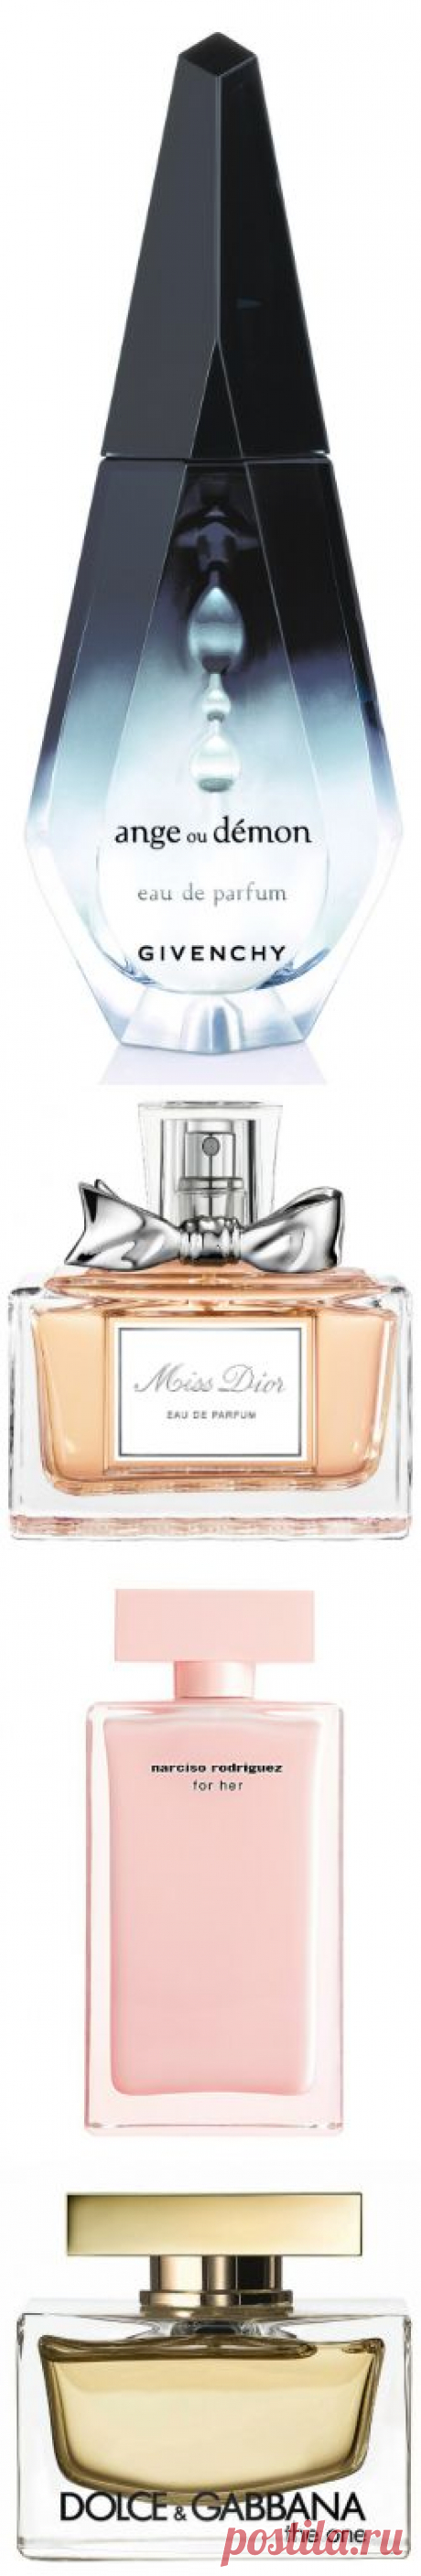 Givenchy Ange ou Demon, Miss Dior и Narciso Rodriguez For Her - 11 культовых ароматов на все времена